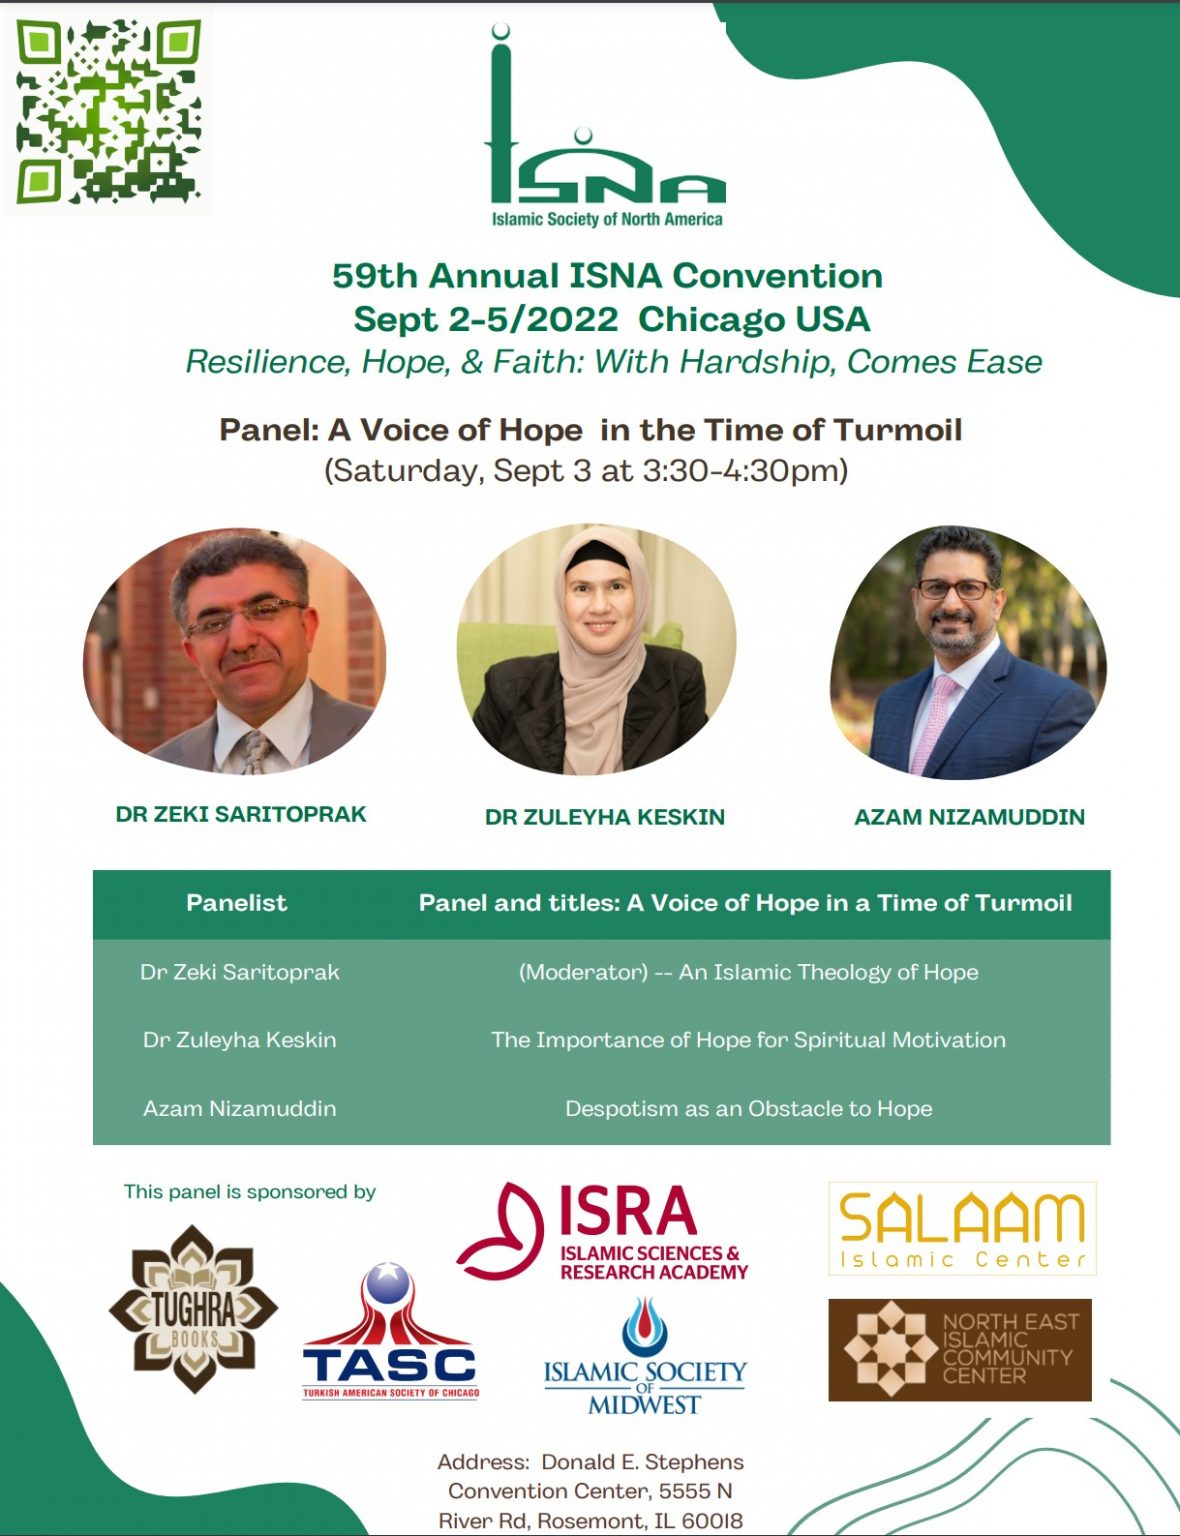 ISNA Panel: A Voice of Hope in the Time of Turmoil